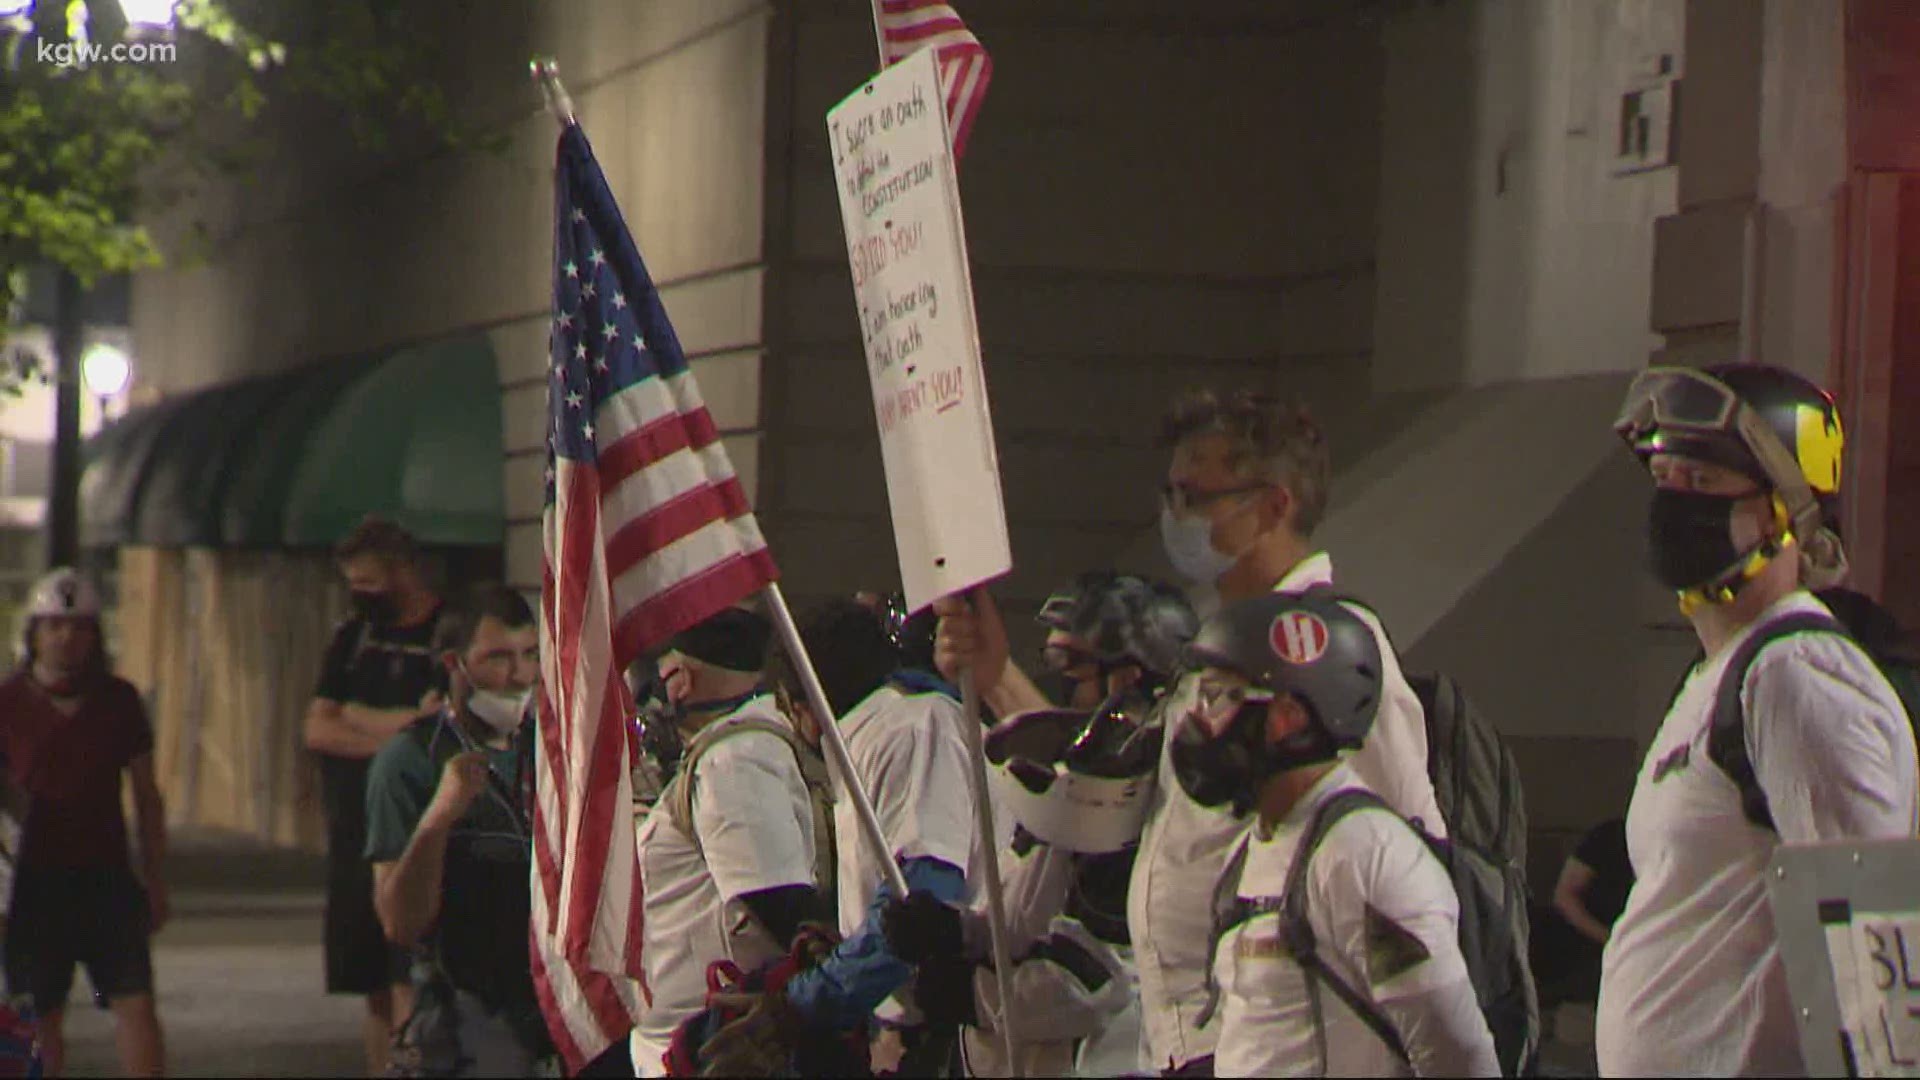 Demonstrators told KGW that they wanted things to remain peaceful Thursday night.